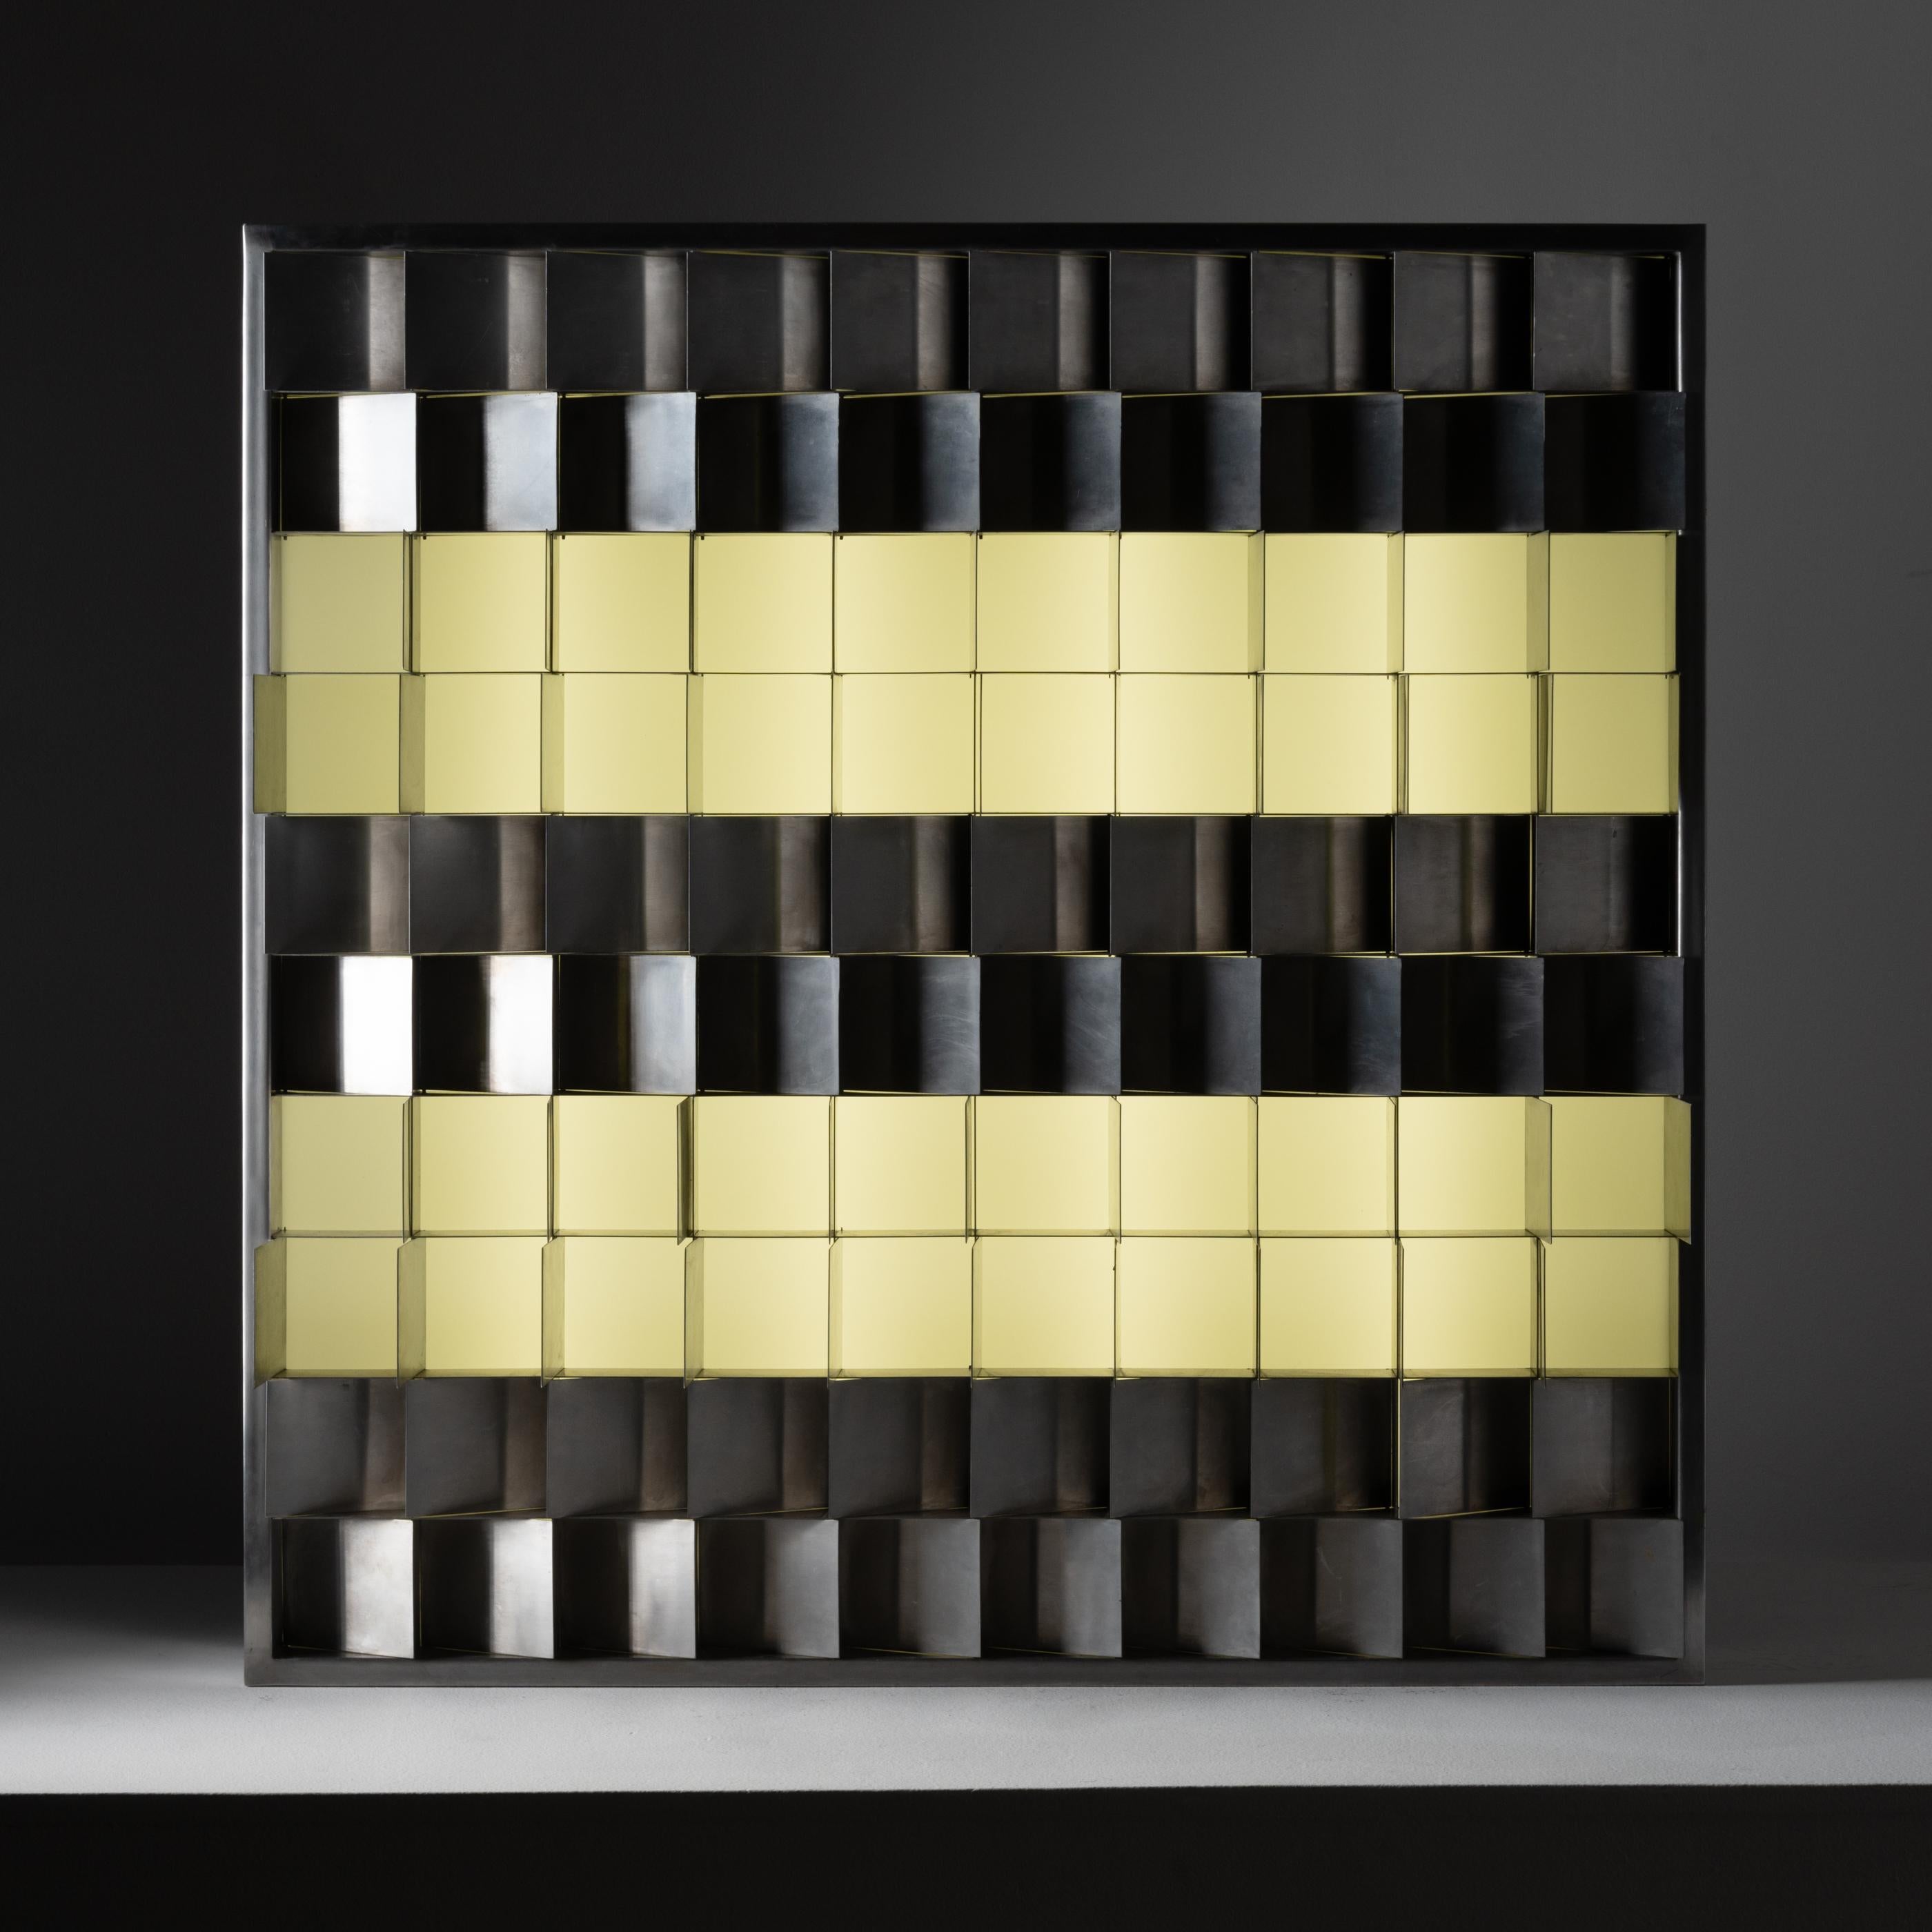 ‘Programma’ light by Gianfranco Fini for New Lamp. Designed and manufactured in Italy, 1970. Constructed of polished stainless steel, with acrylic light box display, and modular stainless steel panels designed to filtrate light intensity to desired